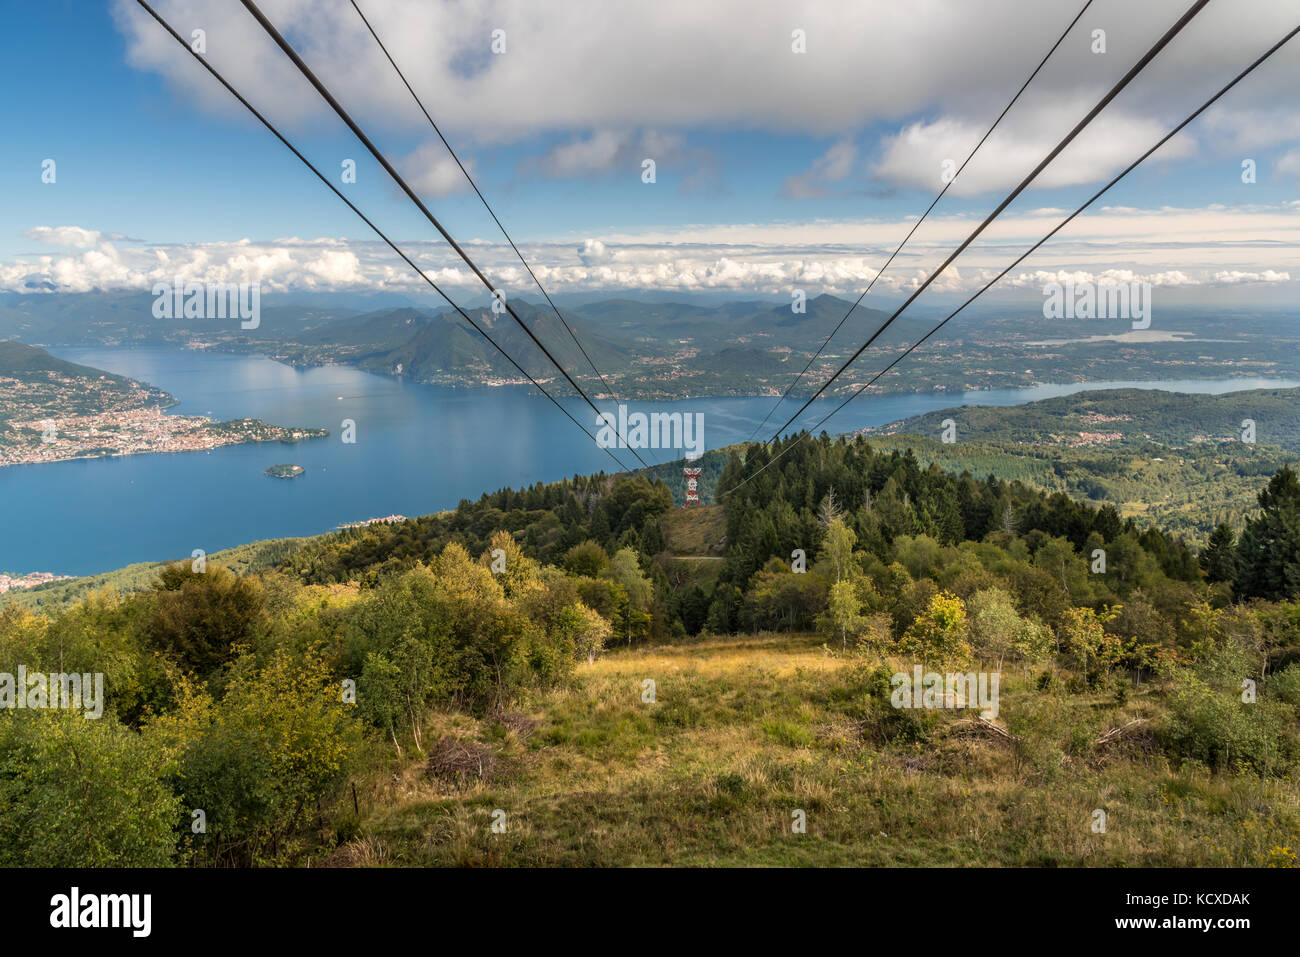 View from Mottarone cable car over Lake Maggiore, Italy. Stock Photo